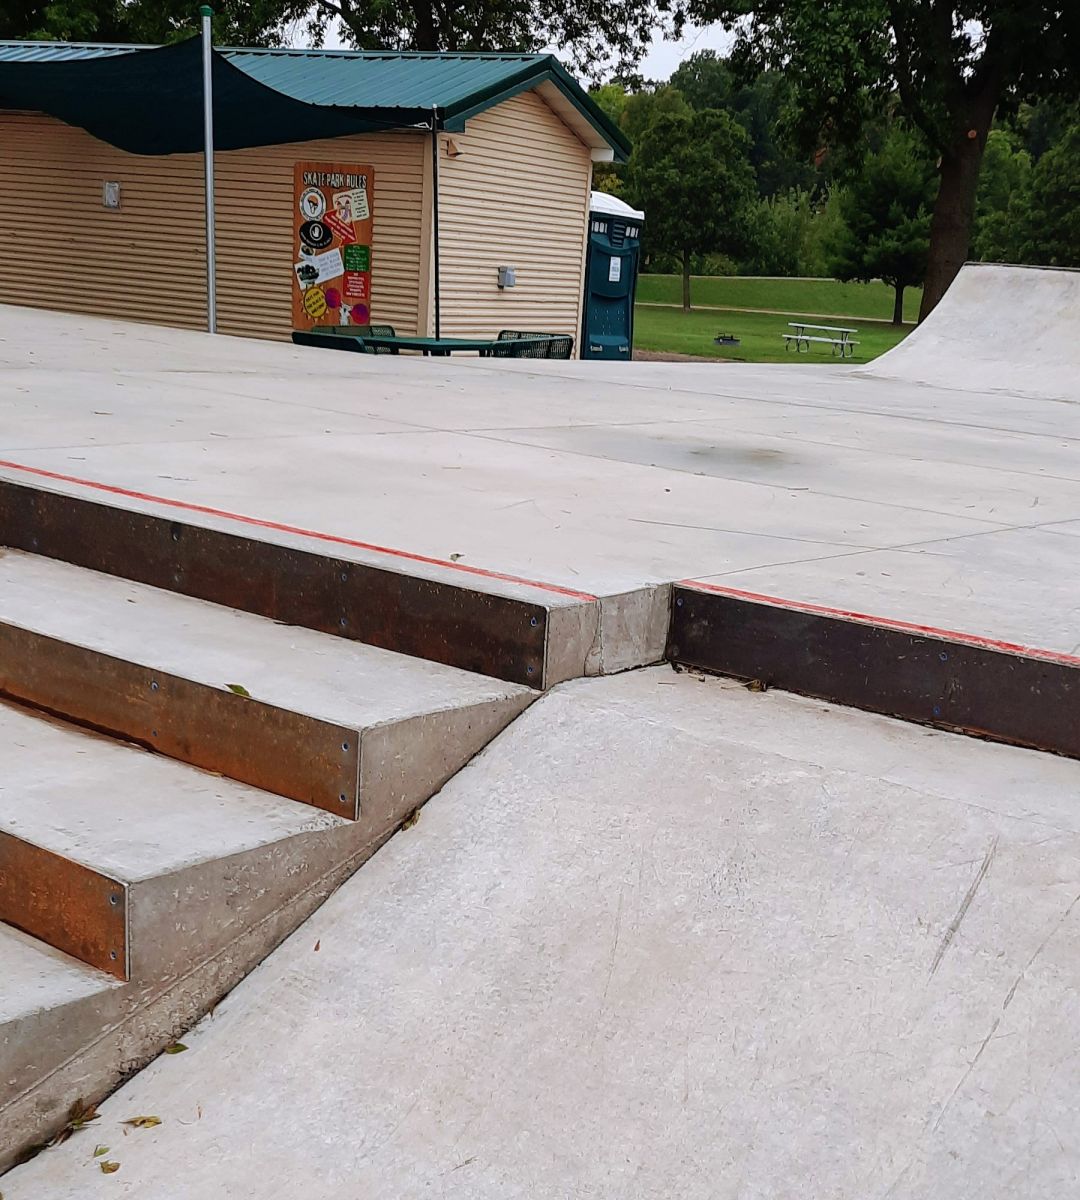 Skateboard ramps and stairs